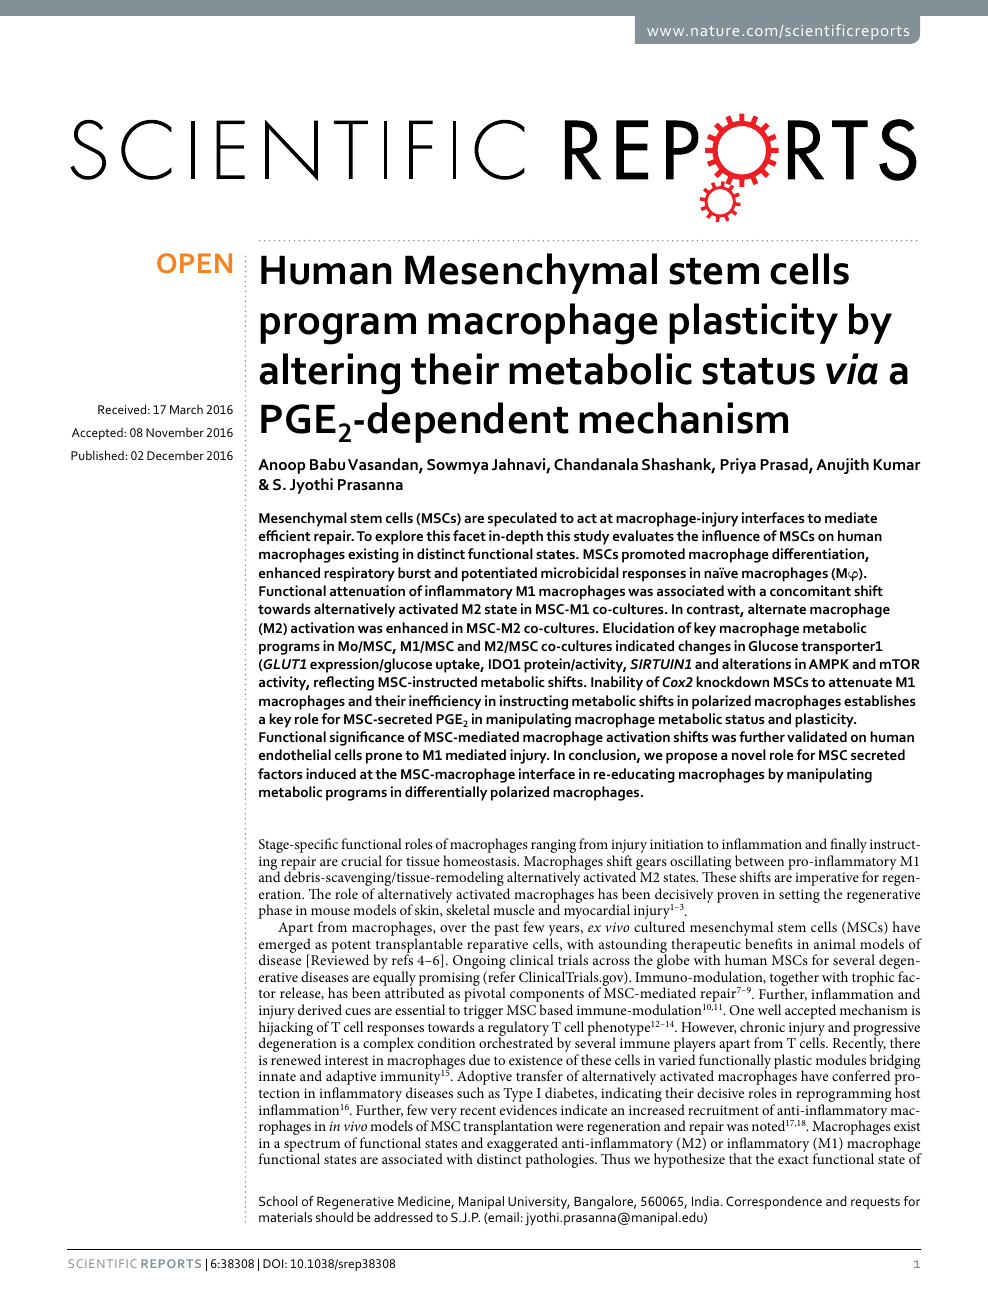 Human Mesenchymal Stem Cells Program Macrophage Plasticity By Altering Their Metabolic Status Via A Pge2 Dependent Mechanism Topic Of Research Paper In Biological Sciences Download Scholarly Article Pdf And Read For Free